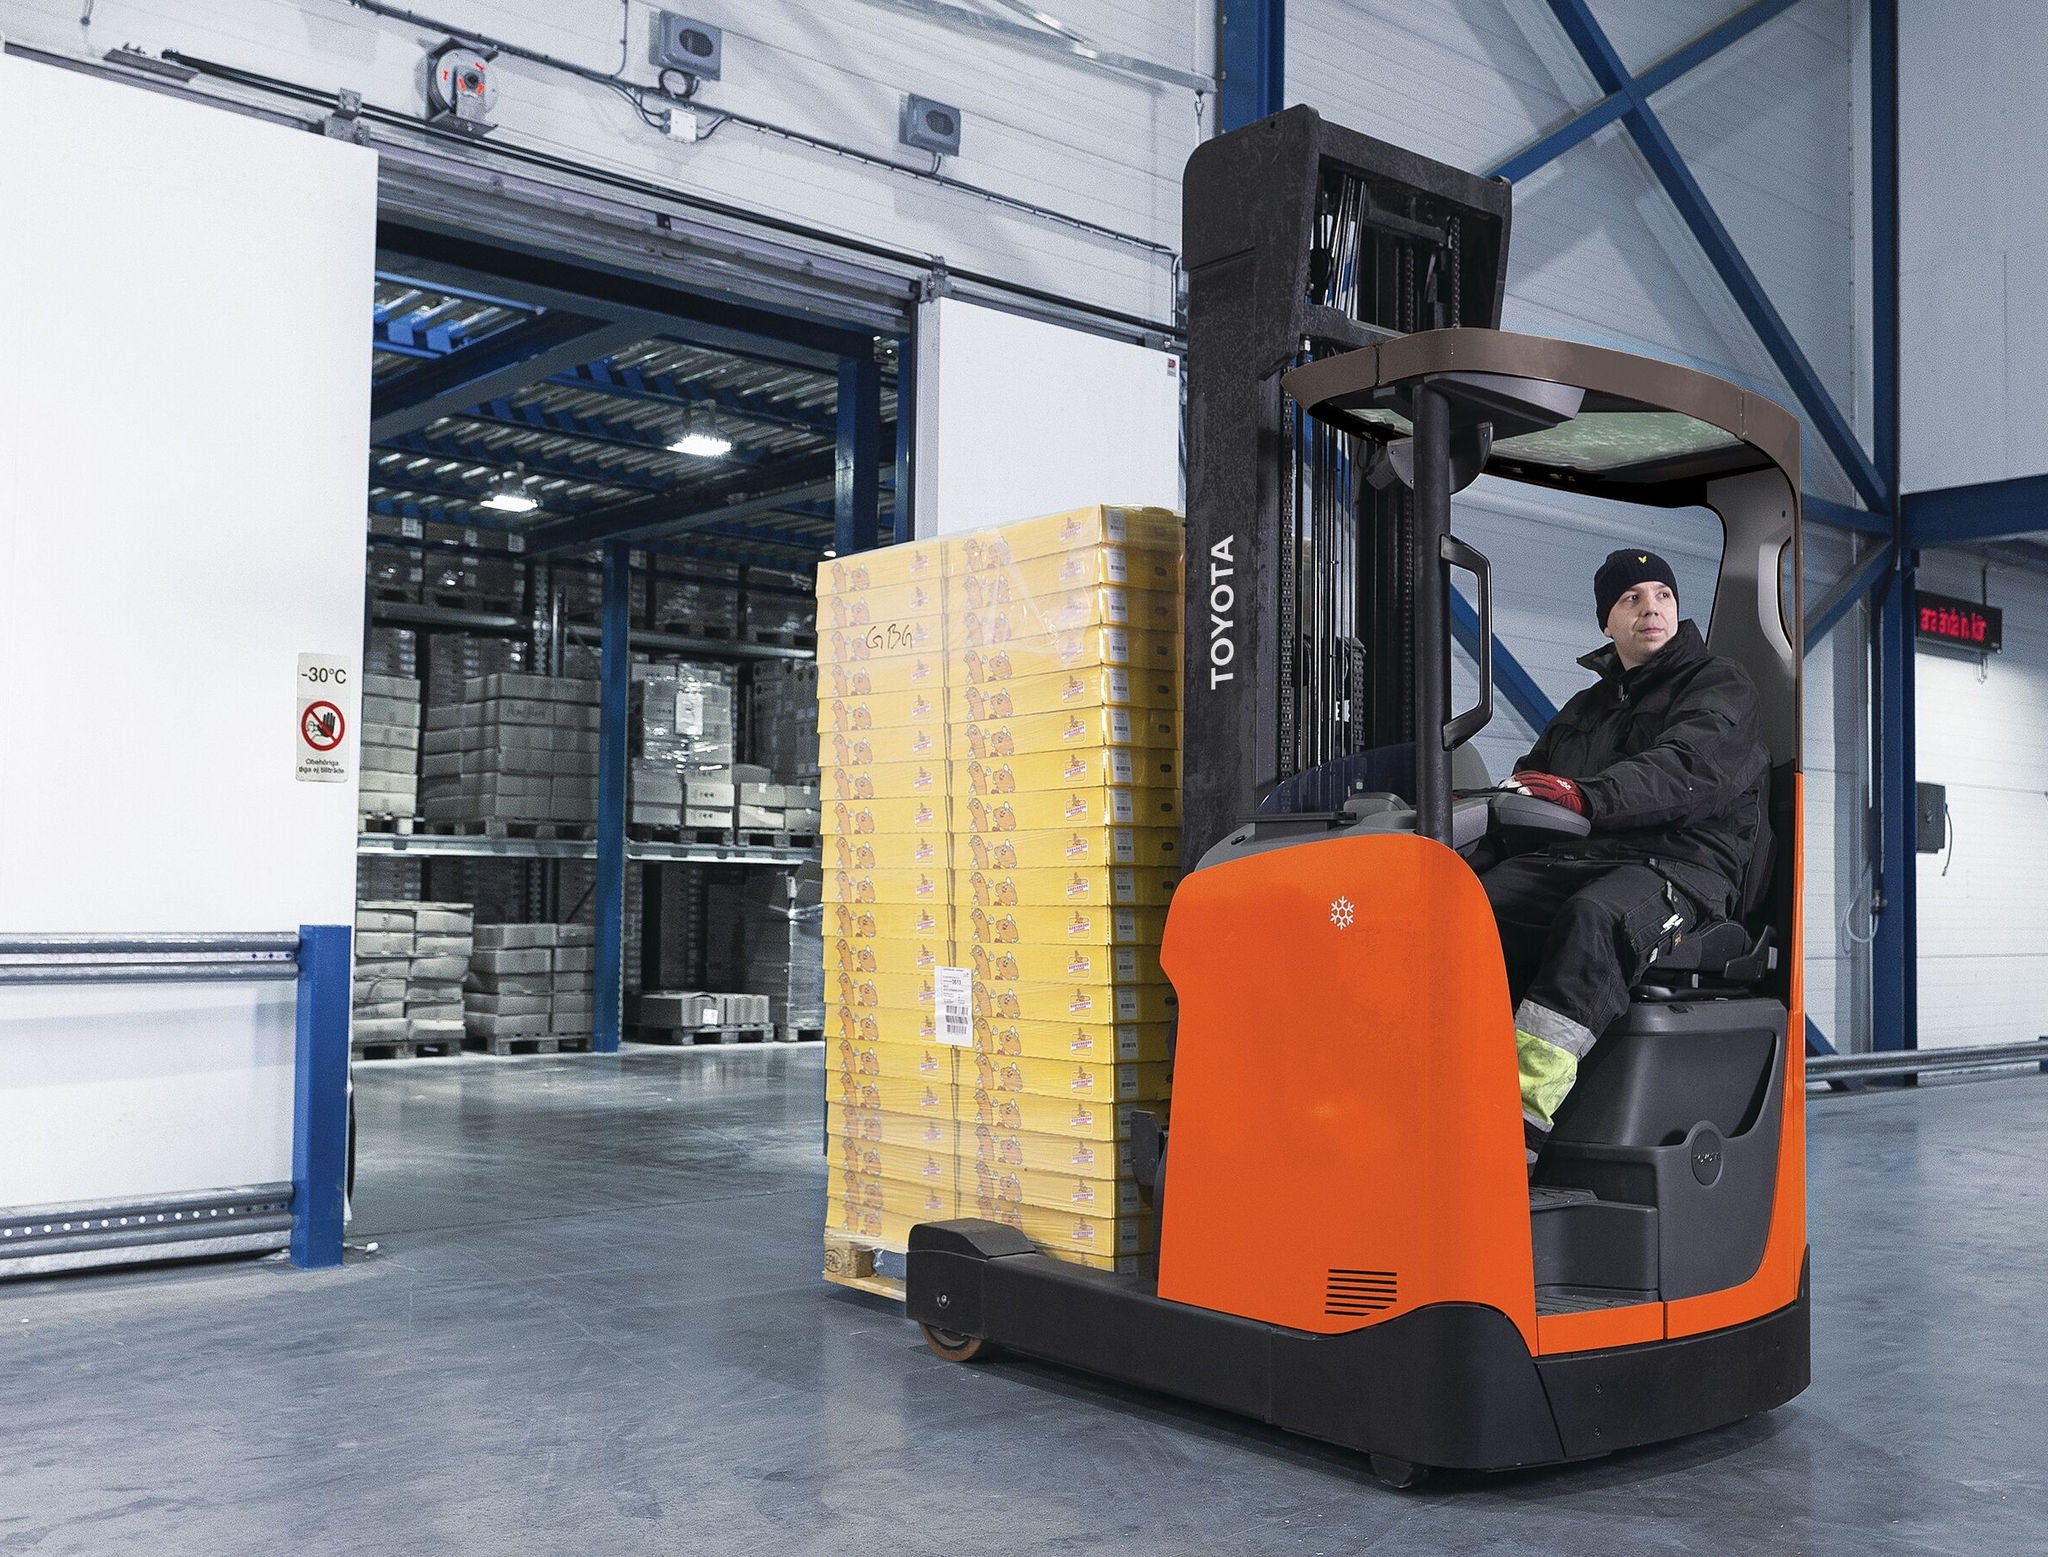 man with hat and heavy coat riding orange forklift in cold environment